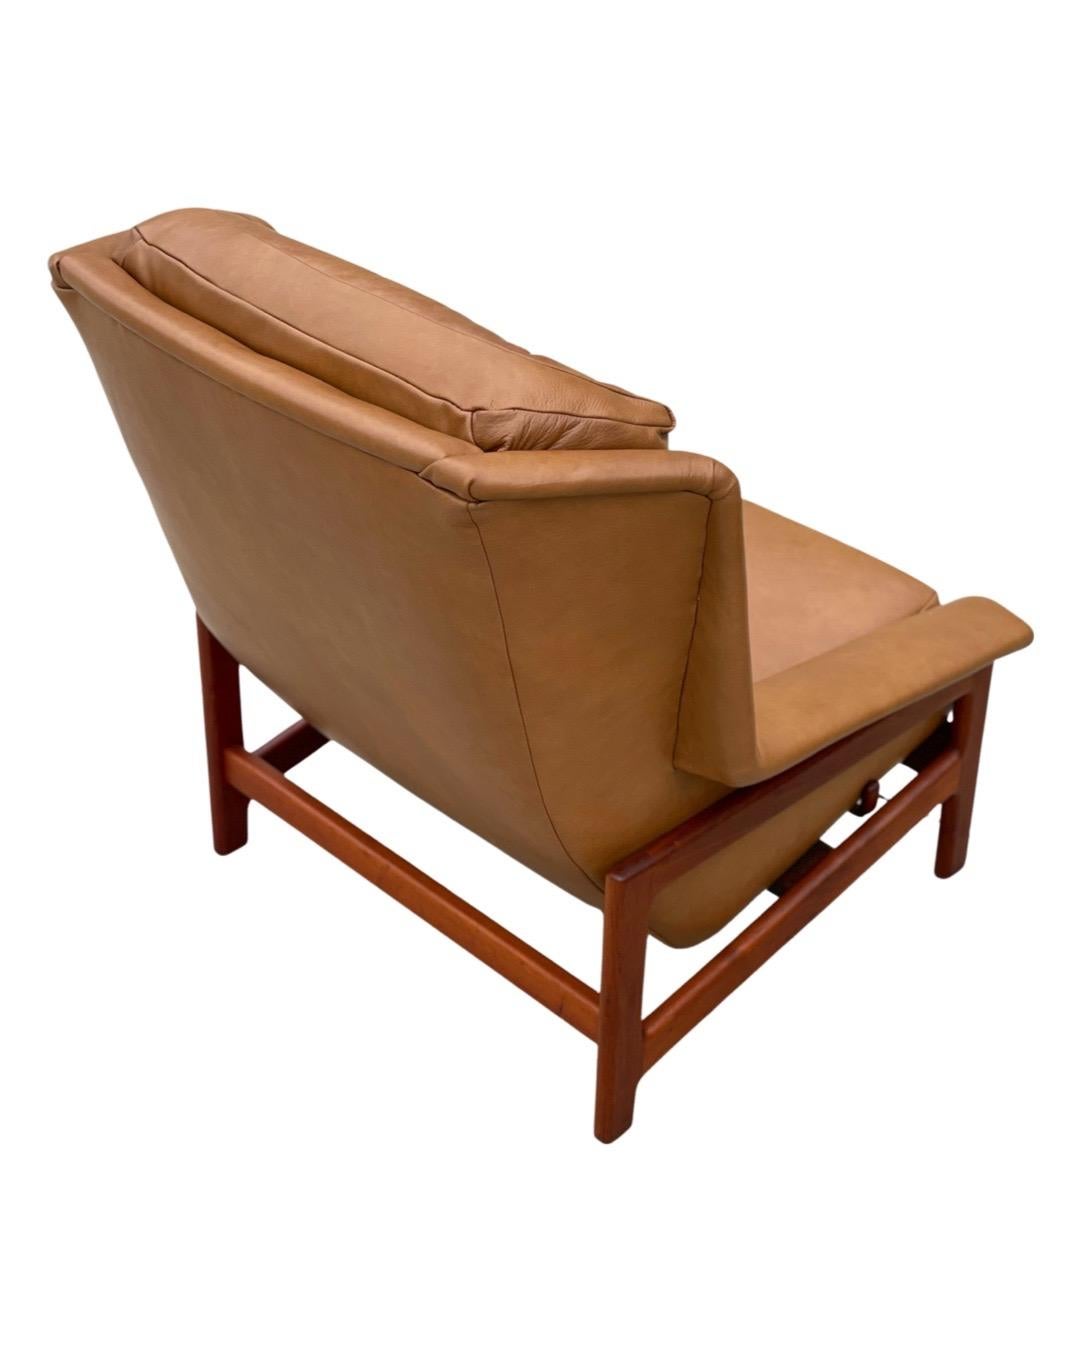 Midcentury Reclining Lounge Chairs in Leather + Walnut by Folke Ohlsson for DUX For Sale 1